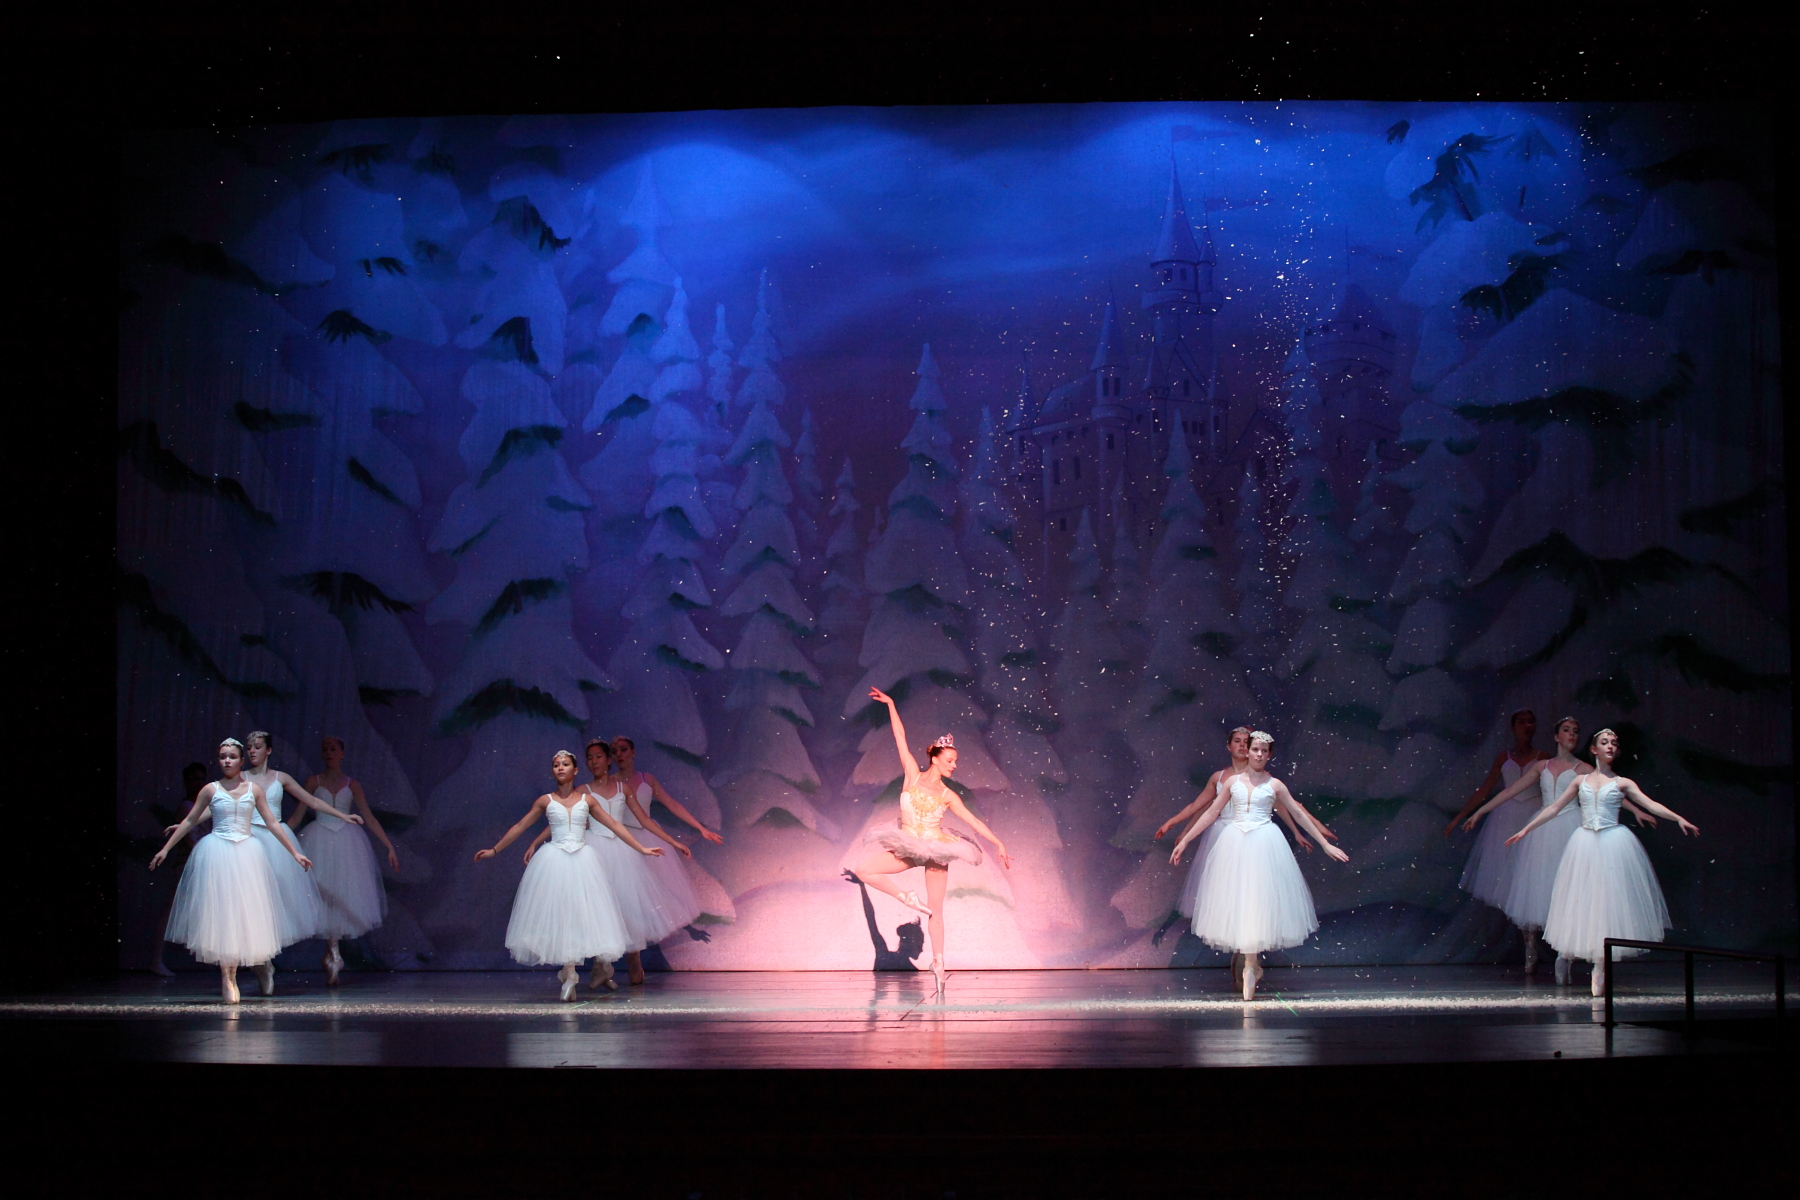 VON HEIDECKE’S CHICAGO FESTIVAL BALLET’S PRODUCTION OF “THE NUTCRACKER” RETURNS TO THE MAC DEC. 20 & 21 1 Von Heidecke’s Chicago Festival Ballet (CFB) marks its 25th anniversary production of “The Nutcracker” with four performances at the McAninch Arts Center (MAC), located at 425 Fawell Blvd., Saturday, Dec. 20 at 2 and 7 p.m., and Sunday, Dec. 21 at 1 and 5 p.m. New Philharmonic Orchestra, under the baton of Maestro Kirk Muspratt, will Tchaikovsky’s classic “Nutcracker” score live for this production marked by dazzling sets and costumes and spectacular dancing.